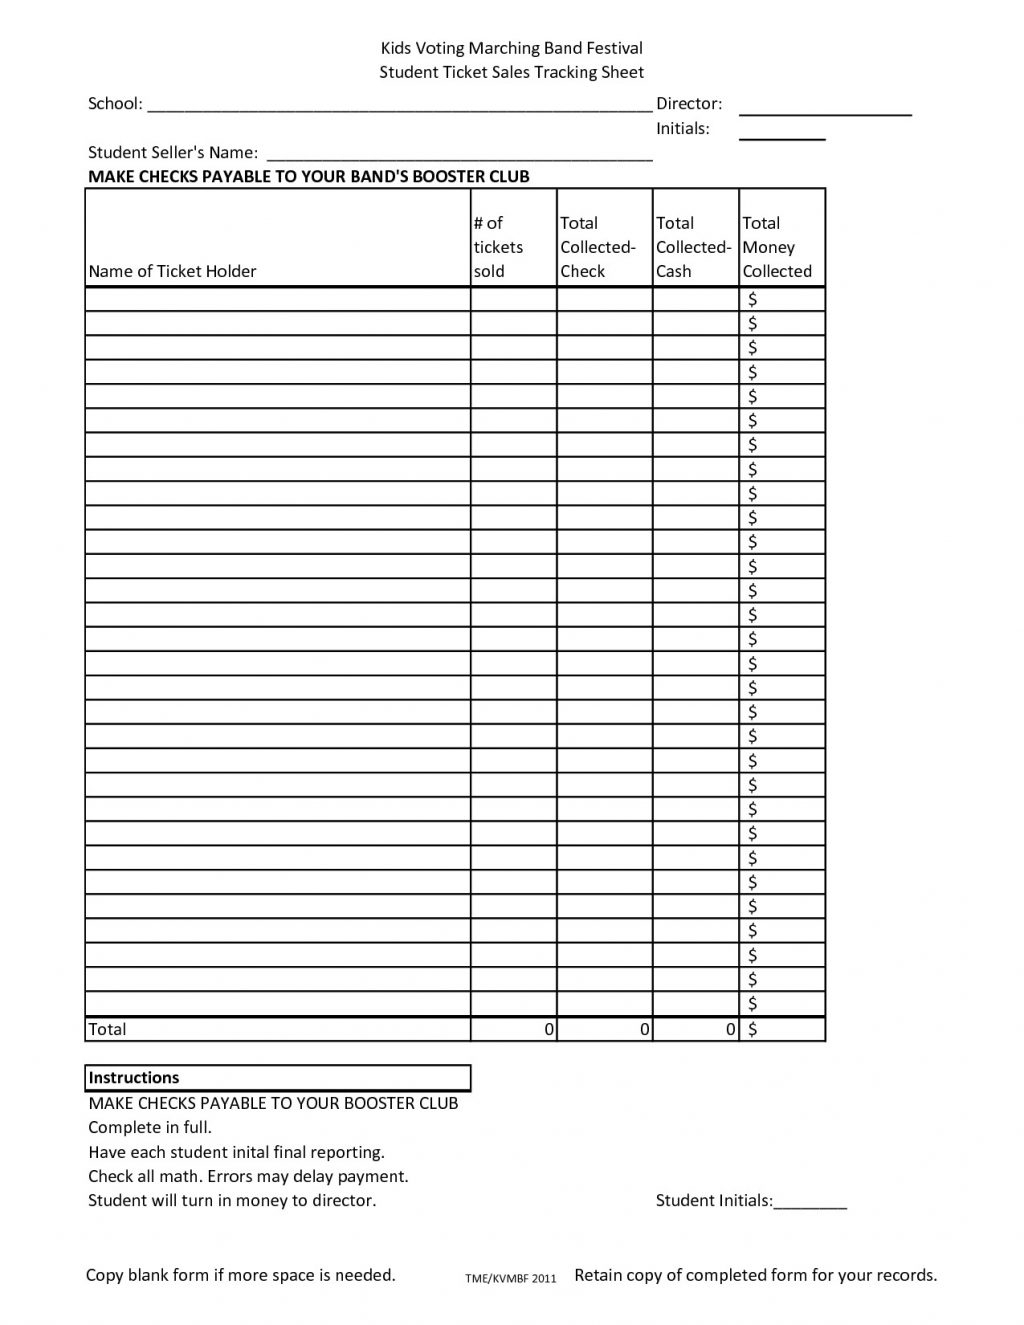 Ticket Tracking Spreadsheet Throughout Sales Sheet Template Awesome Cool Student Tracking Images Example